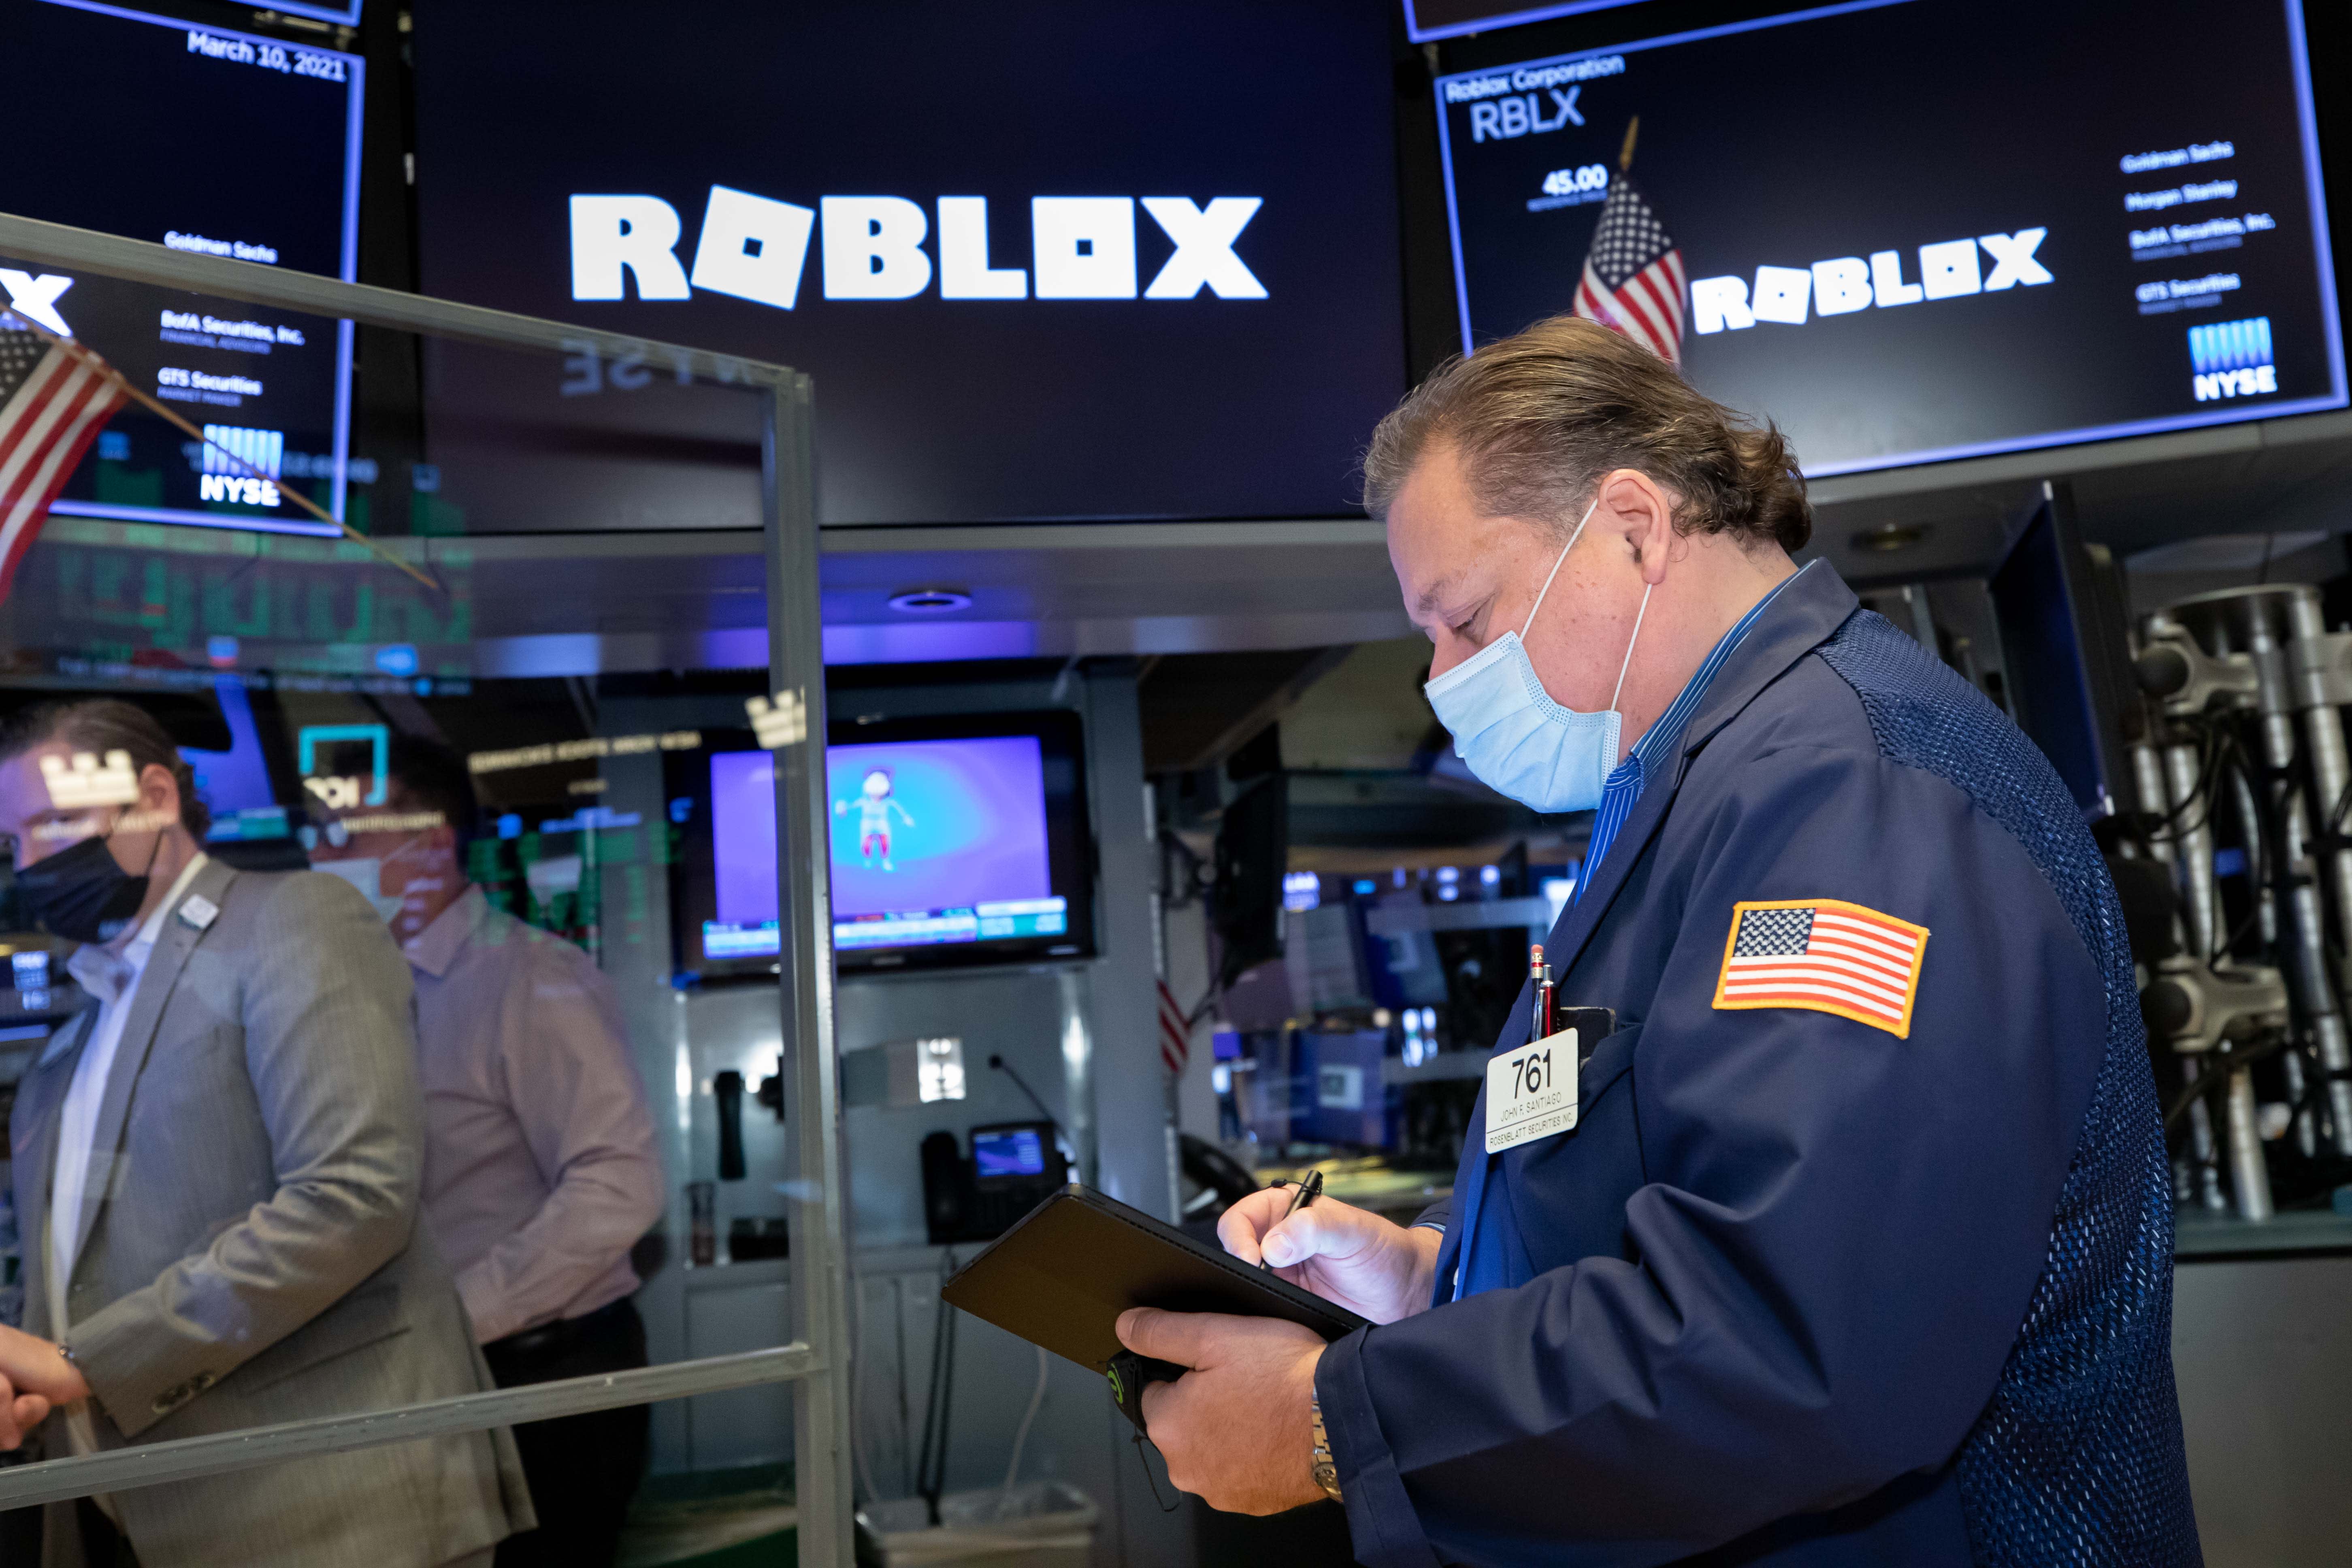 Roblox stock dives 24% after earnings miss